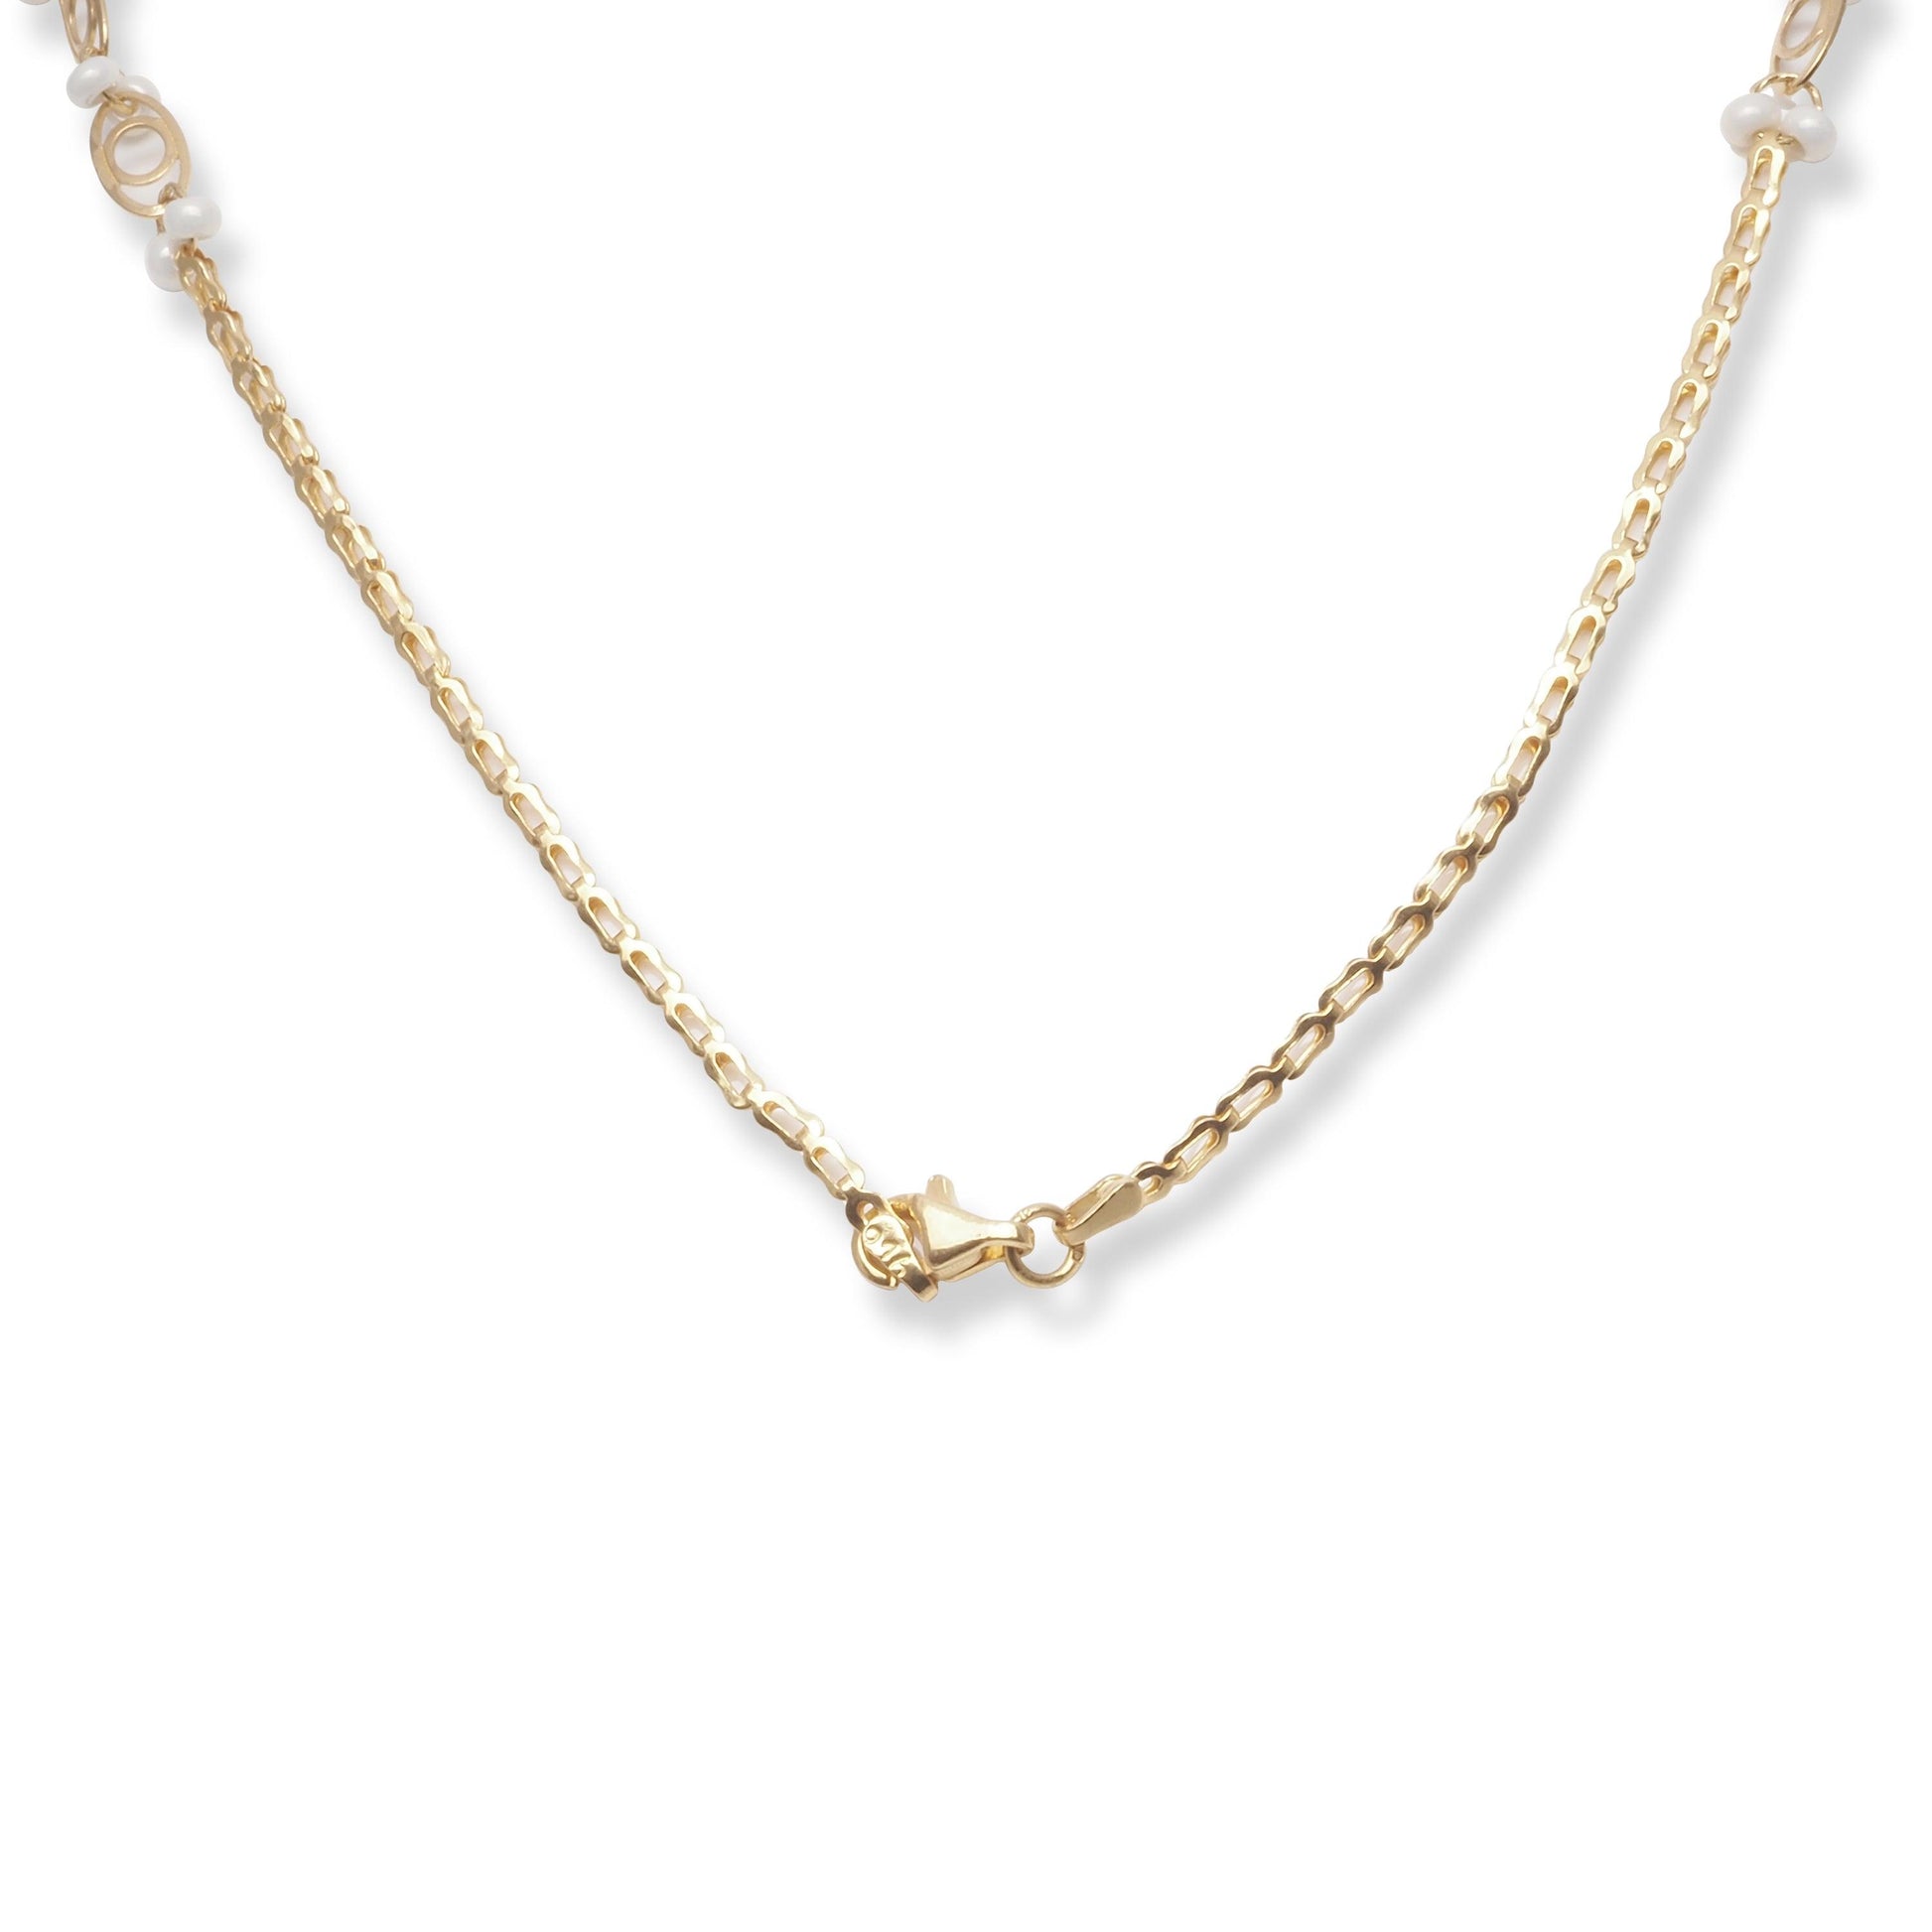 22ct Gold Necklace with Cultured Pearl Beads and Lobster Clasp N-7934 - Minar Jewellers